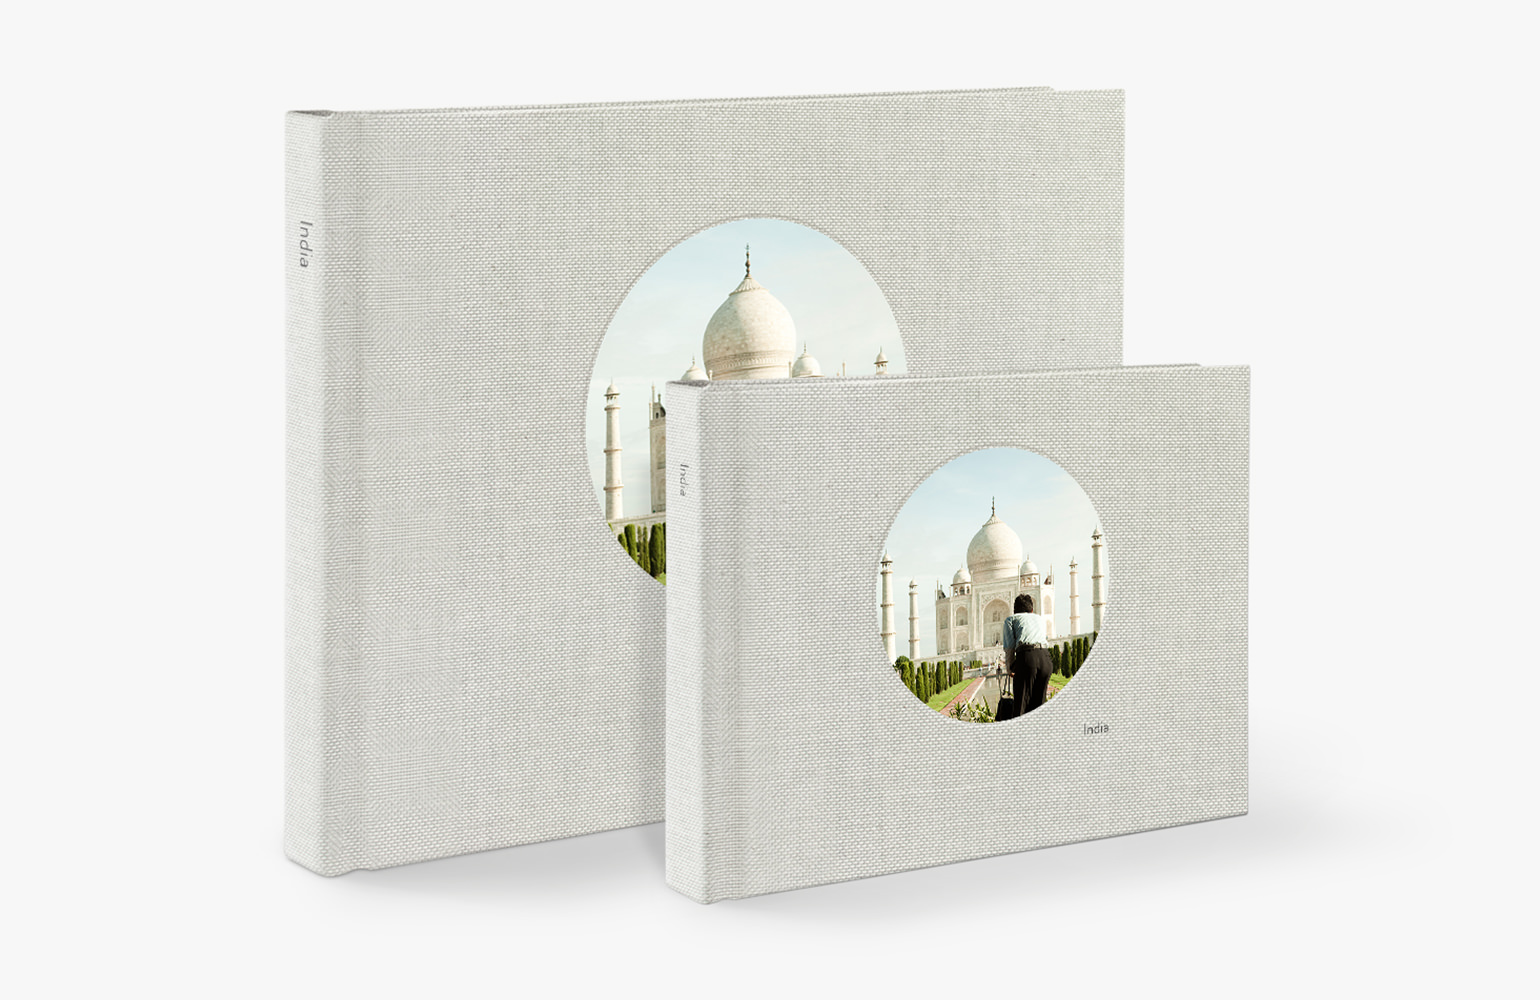 Two standing premium landscape photo books with image of the Taj Mahal on both covers.